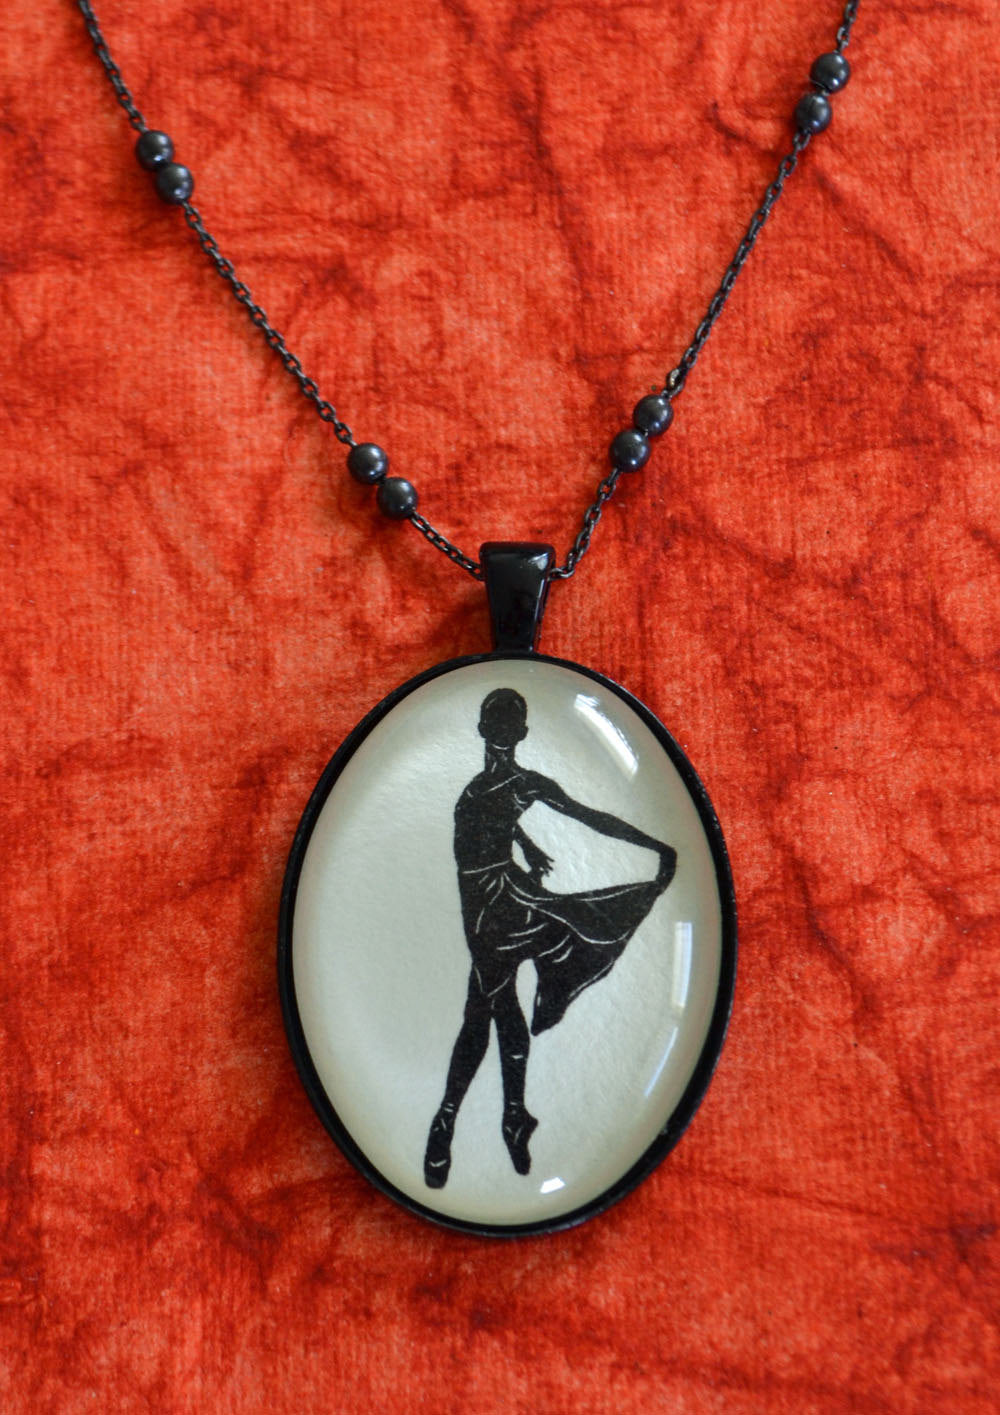 WENDY WHELAN Necklace, pendant on chain - Silhouette Jewelry